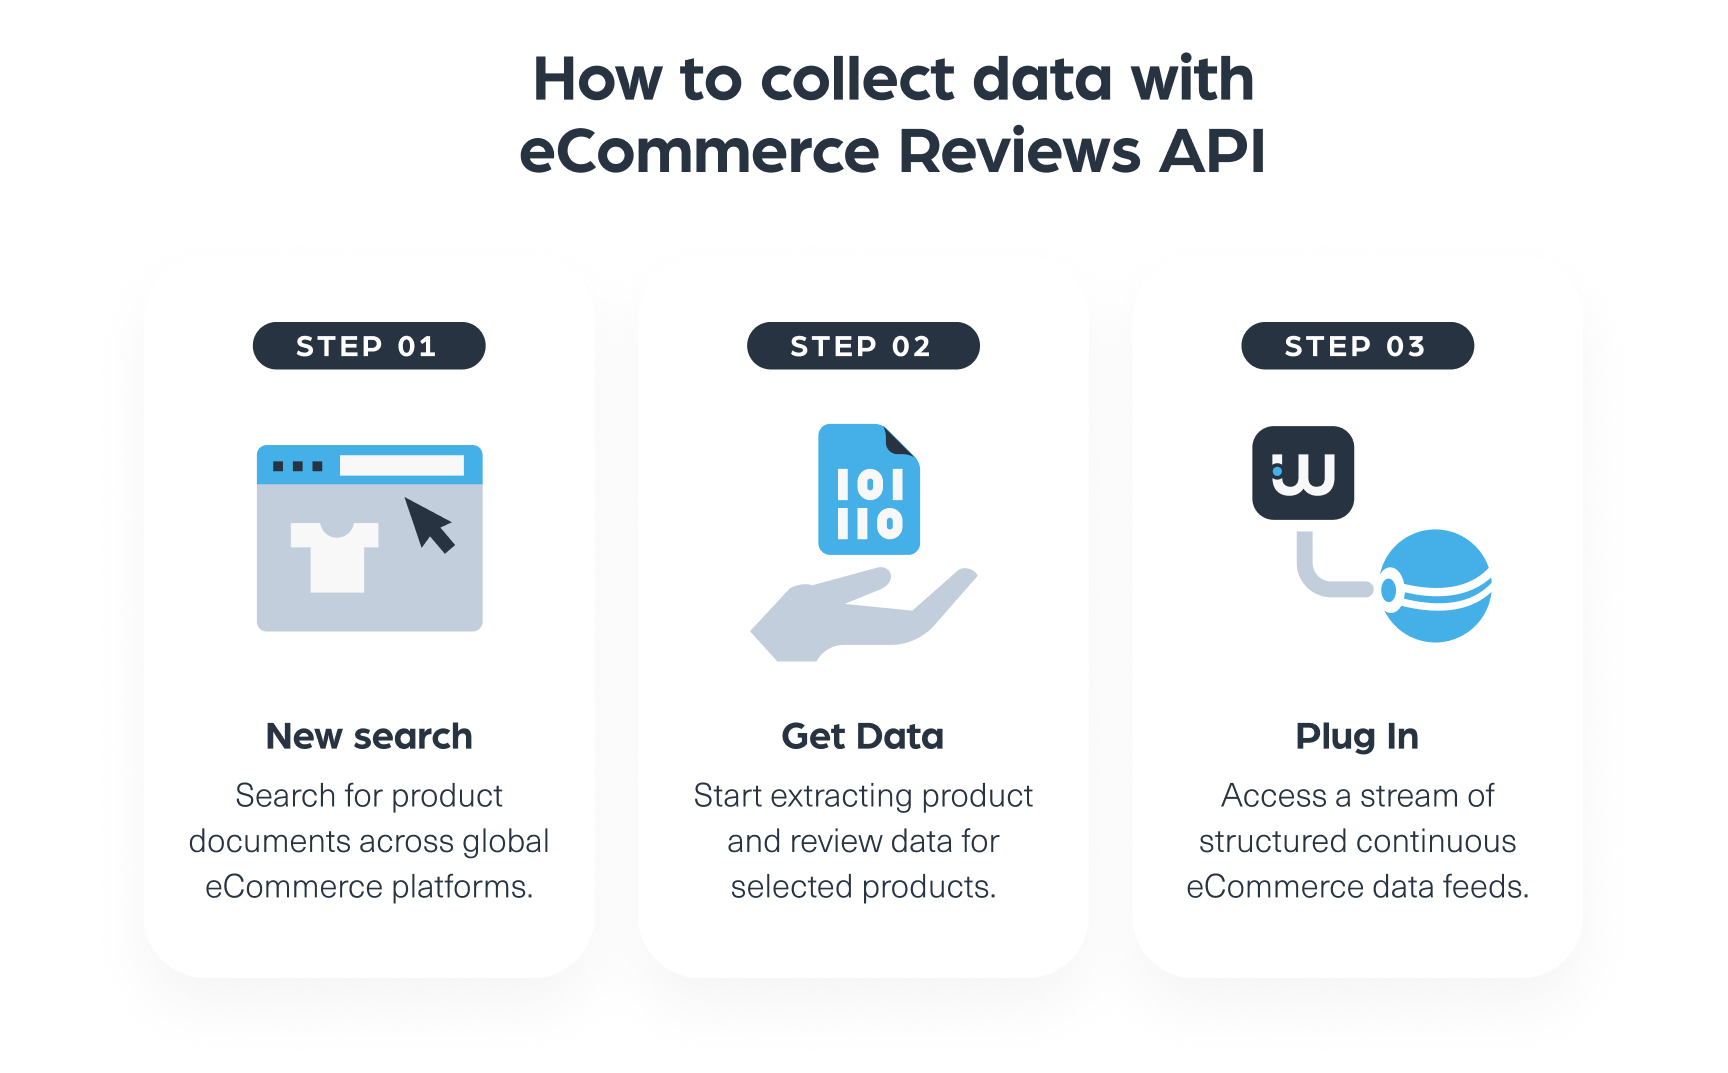 How to collect data with eCommerce Reviews API